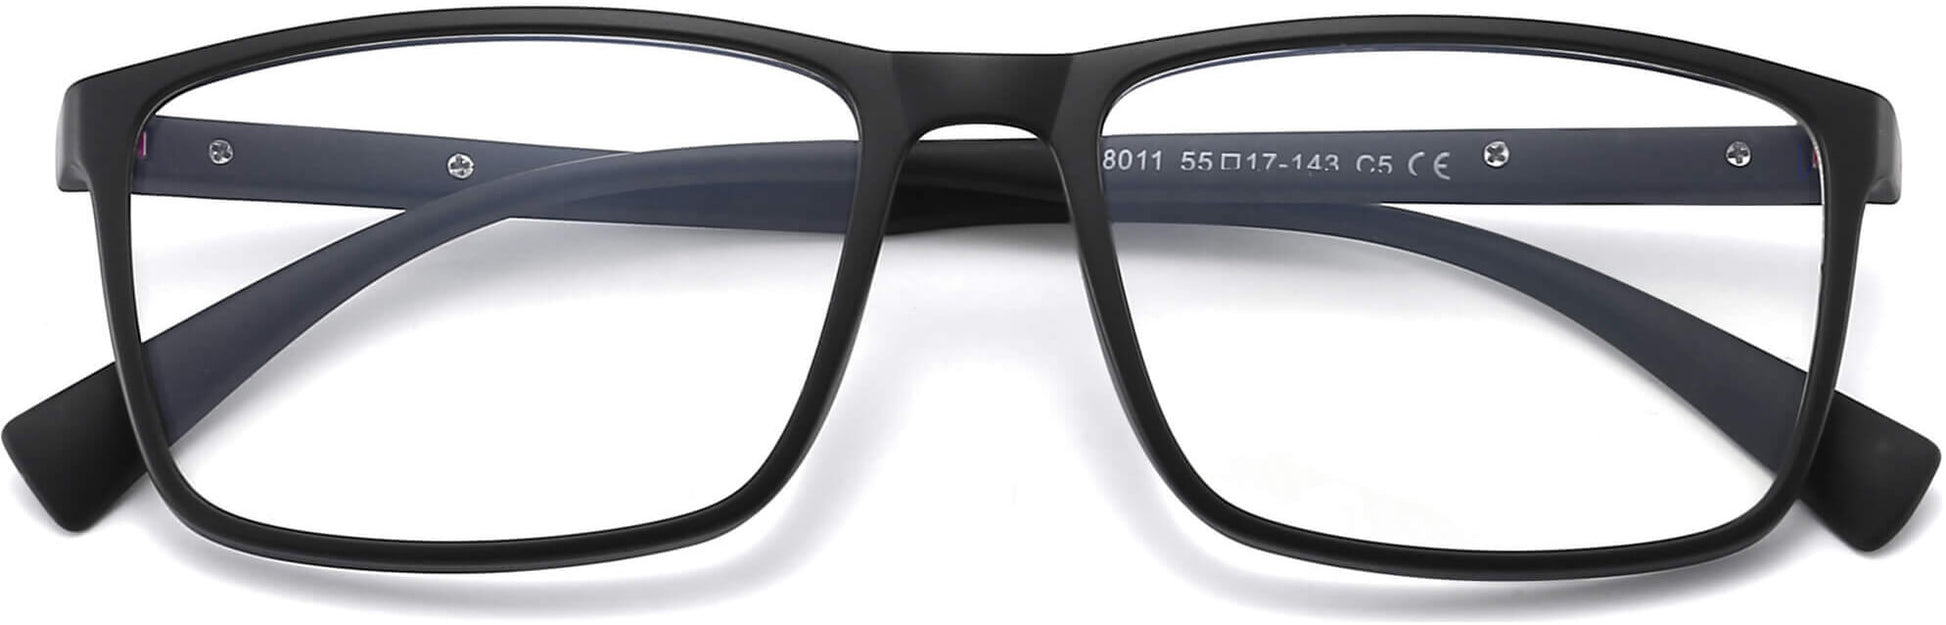 Leo Rectangle Black Eyeglasses from ANRRI, closed view